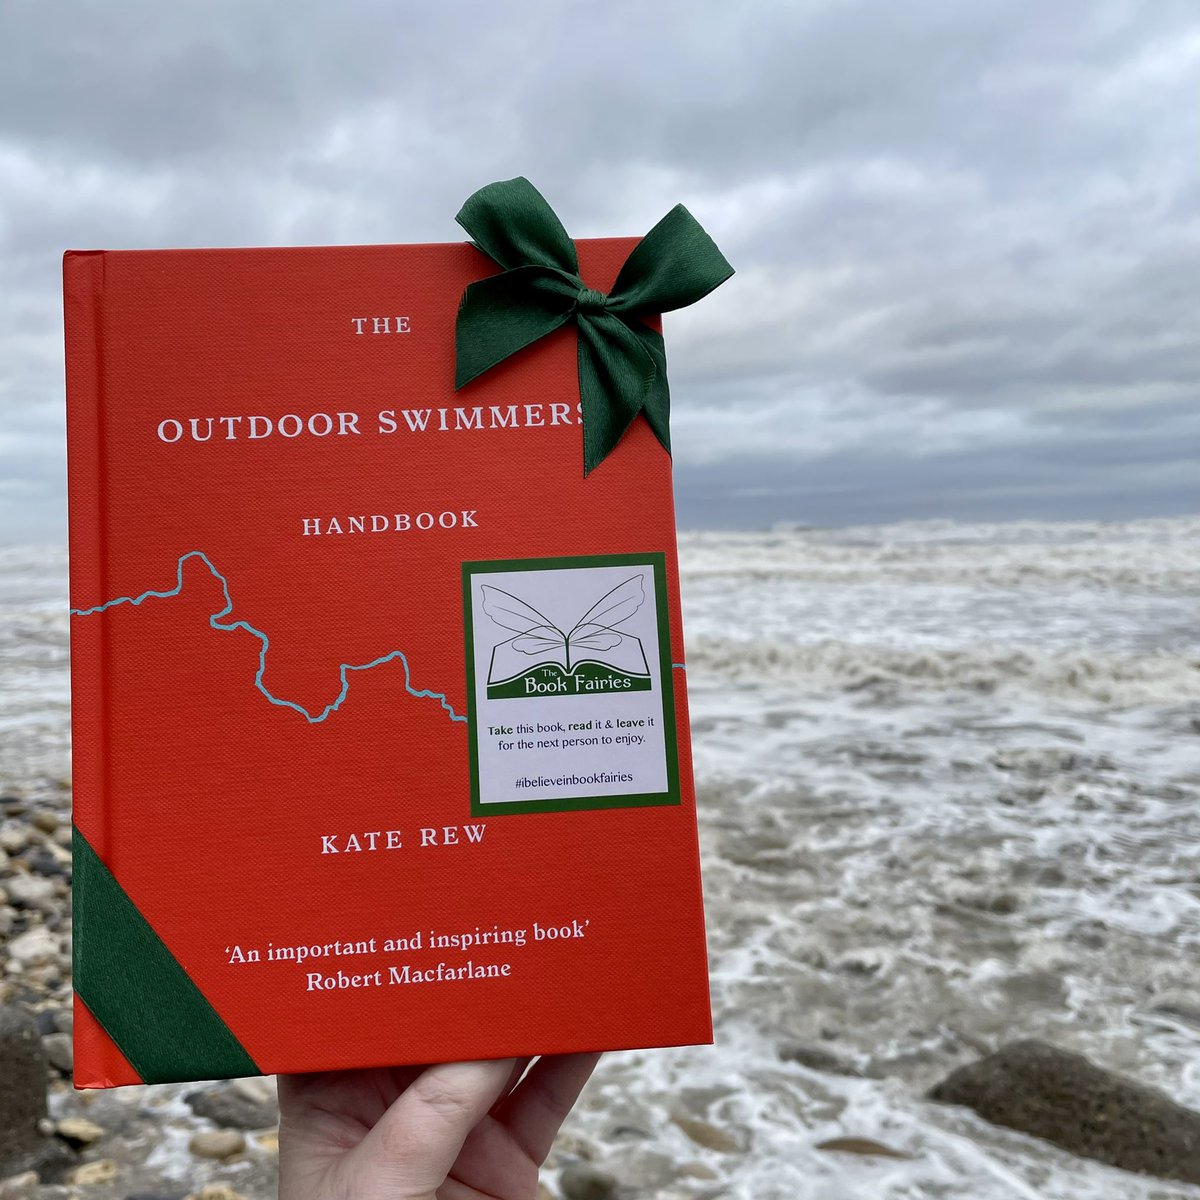 As part of our nationwide #COPBookFairies activity, book fairies have hidden a copy of #TheOutdoorSwimmersHandbook by Kate Rew at Ryhope beach today. #ibelieveinbookfairies #COPBookFairies #TBFEbury #GreenBookFairies #ClimateJustice #Just_And_Ambitious #TogetherForImplementation